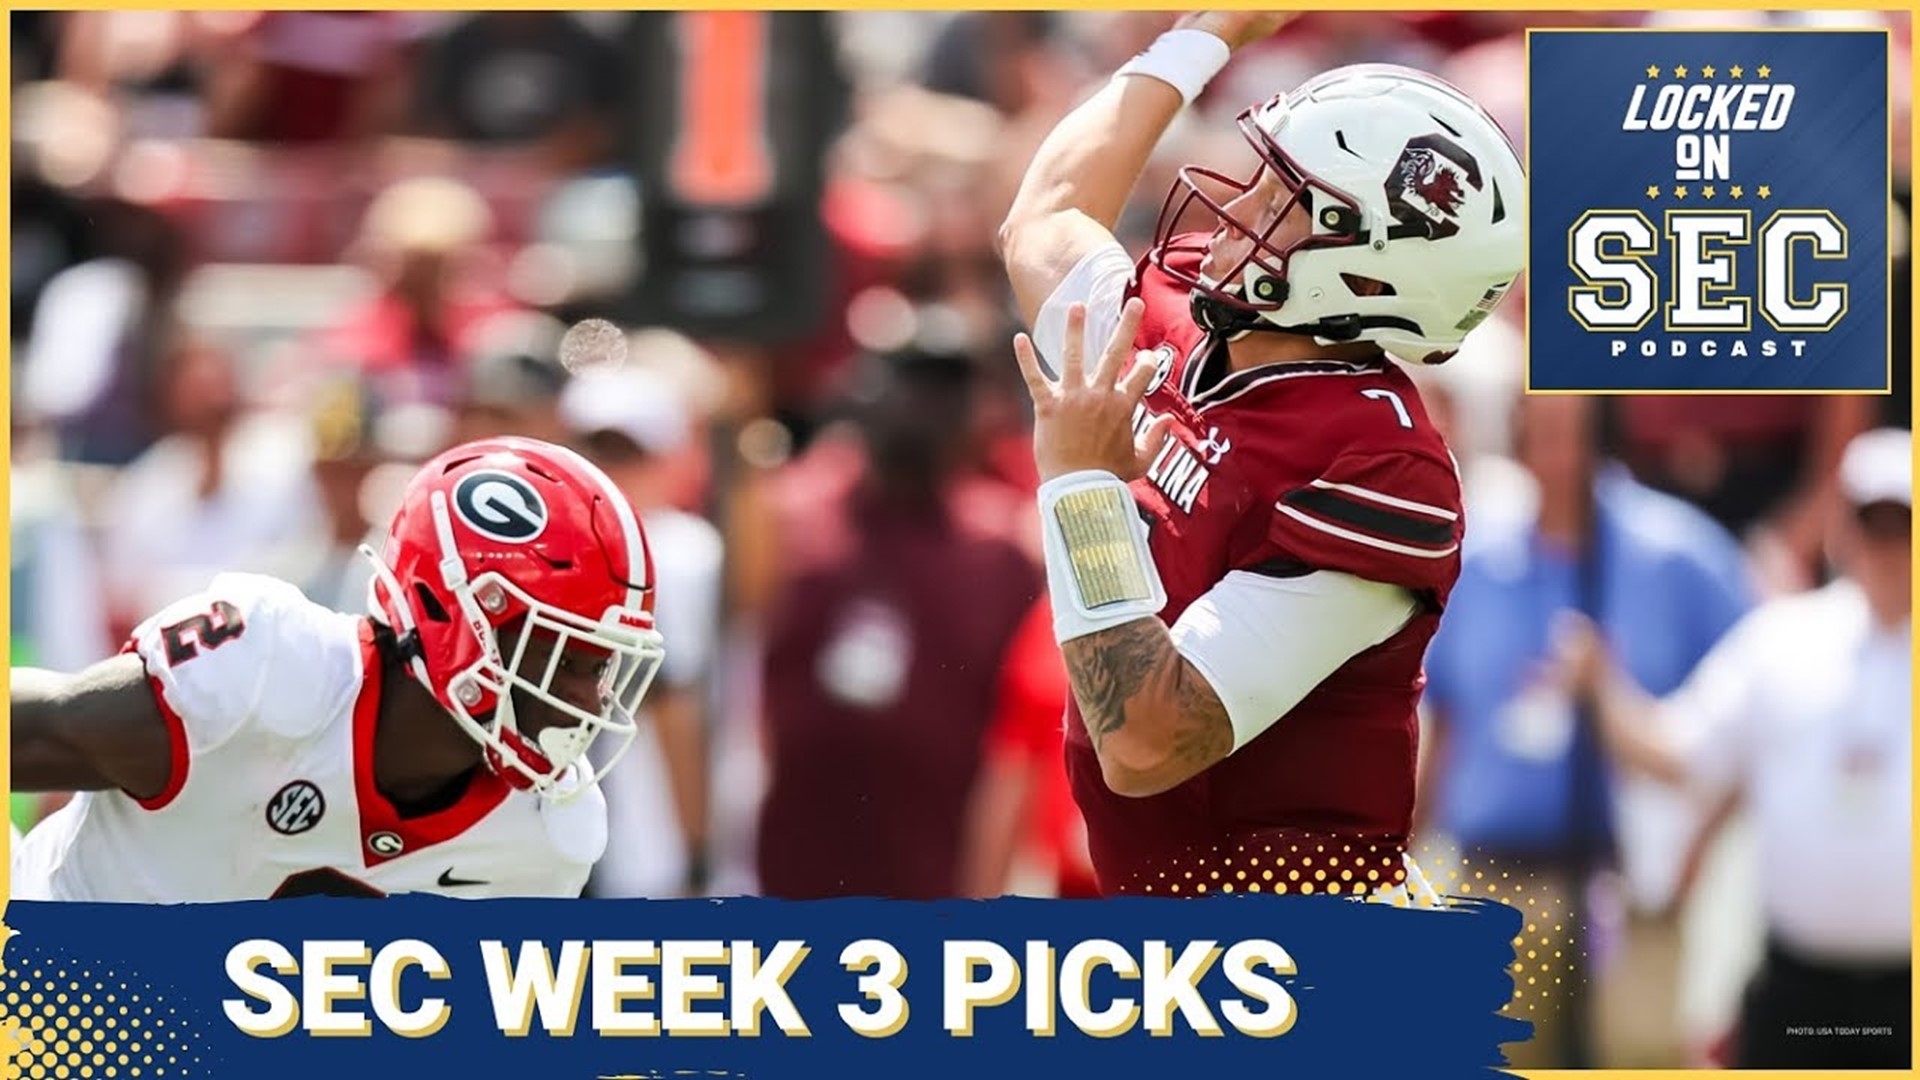 We have a jam-packed show as we preview the highly anticipated Week 3 matchups in the SEC. We'll be diving into the Game of the Week, Tennessee at Florida